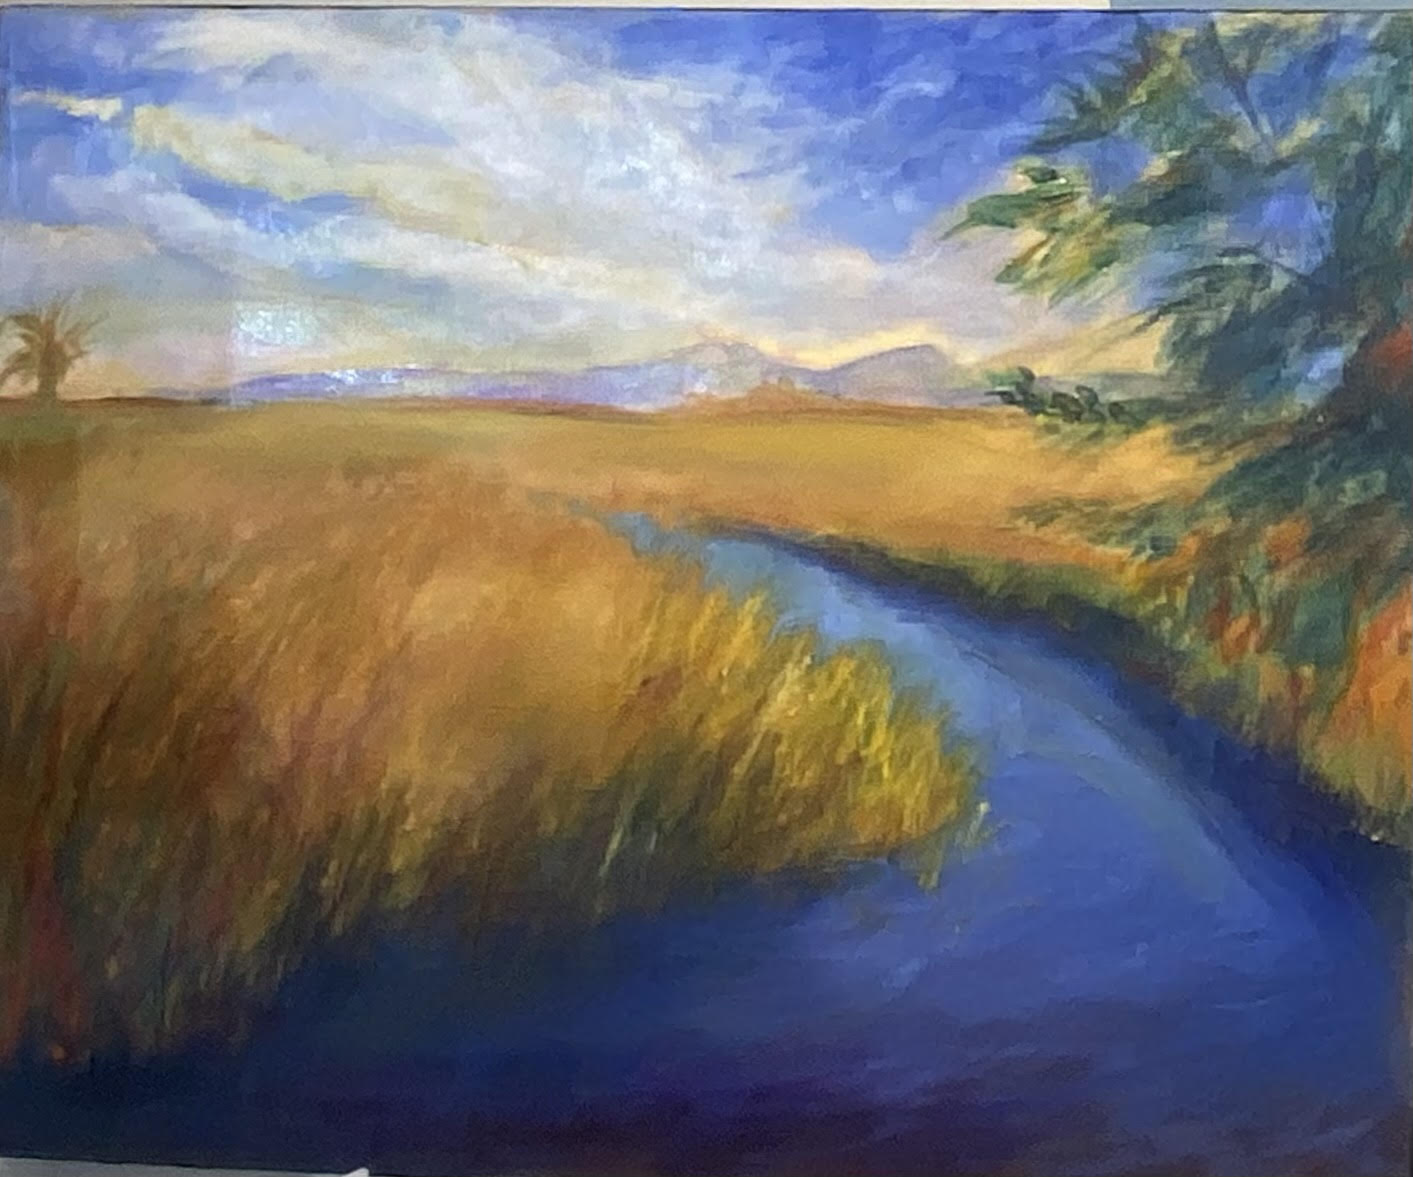 LorettaD- Painting- "Meadow Water" 16x20